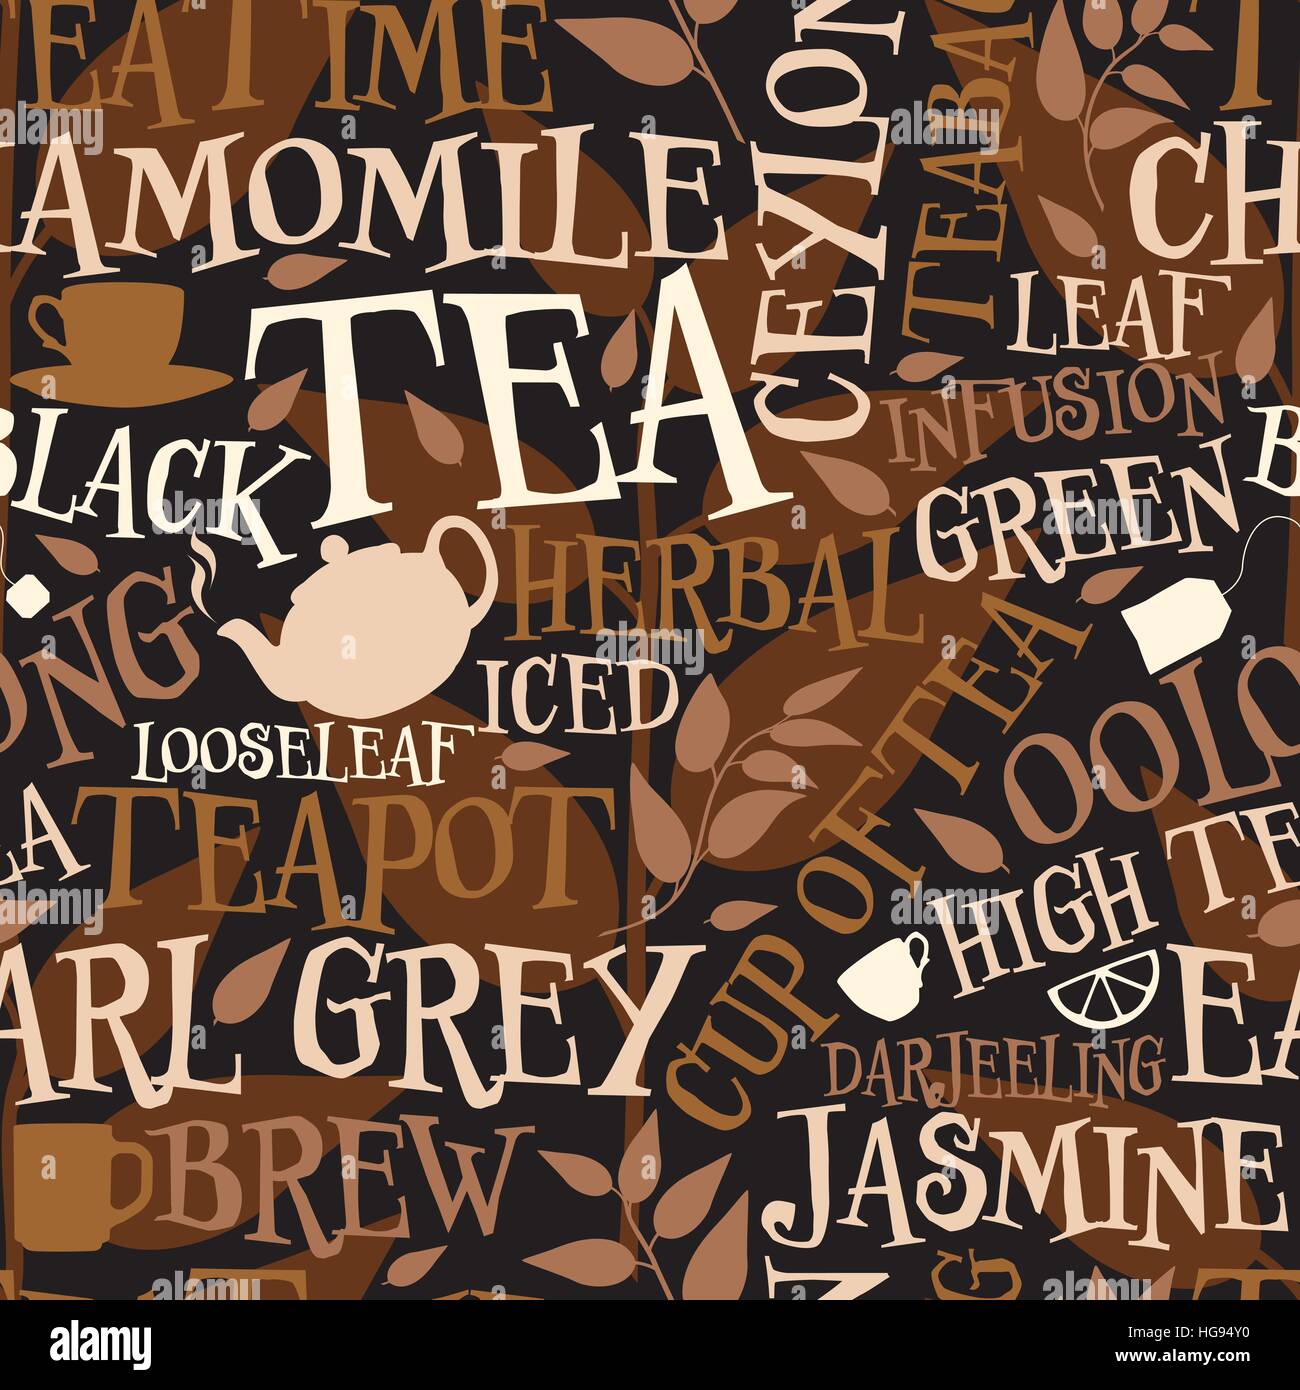 Vector seamless tile of tea words and symbols Stock Vector